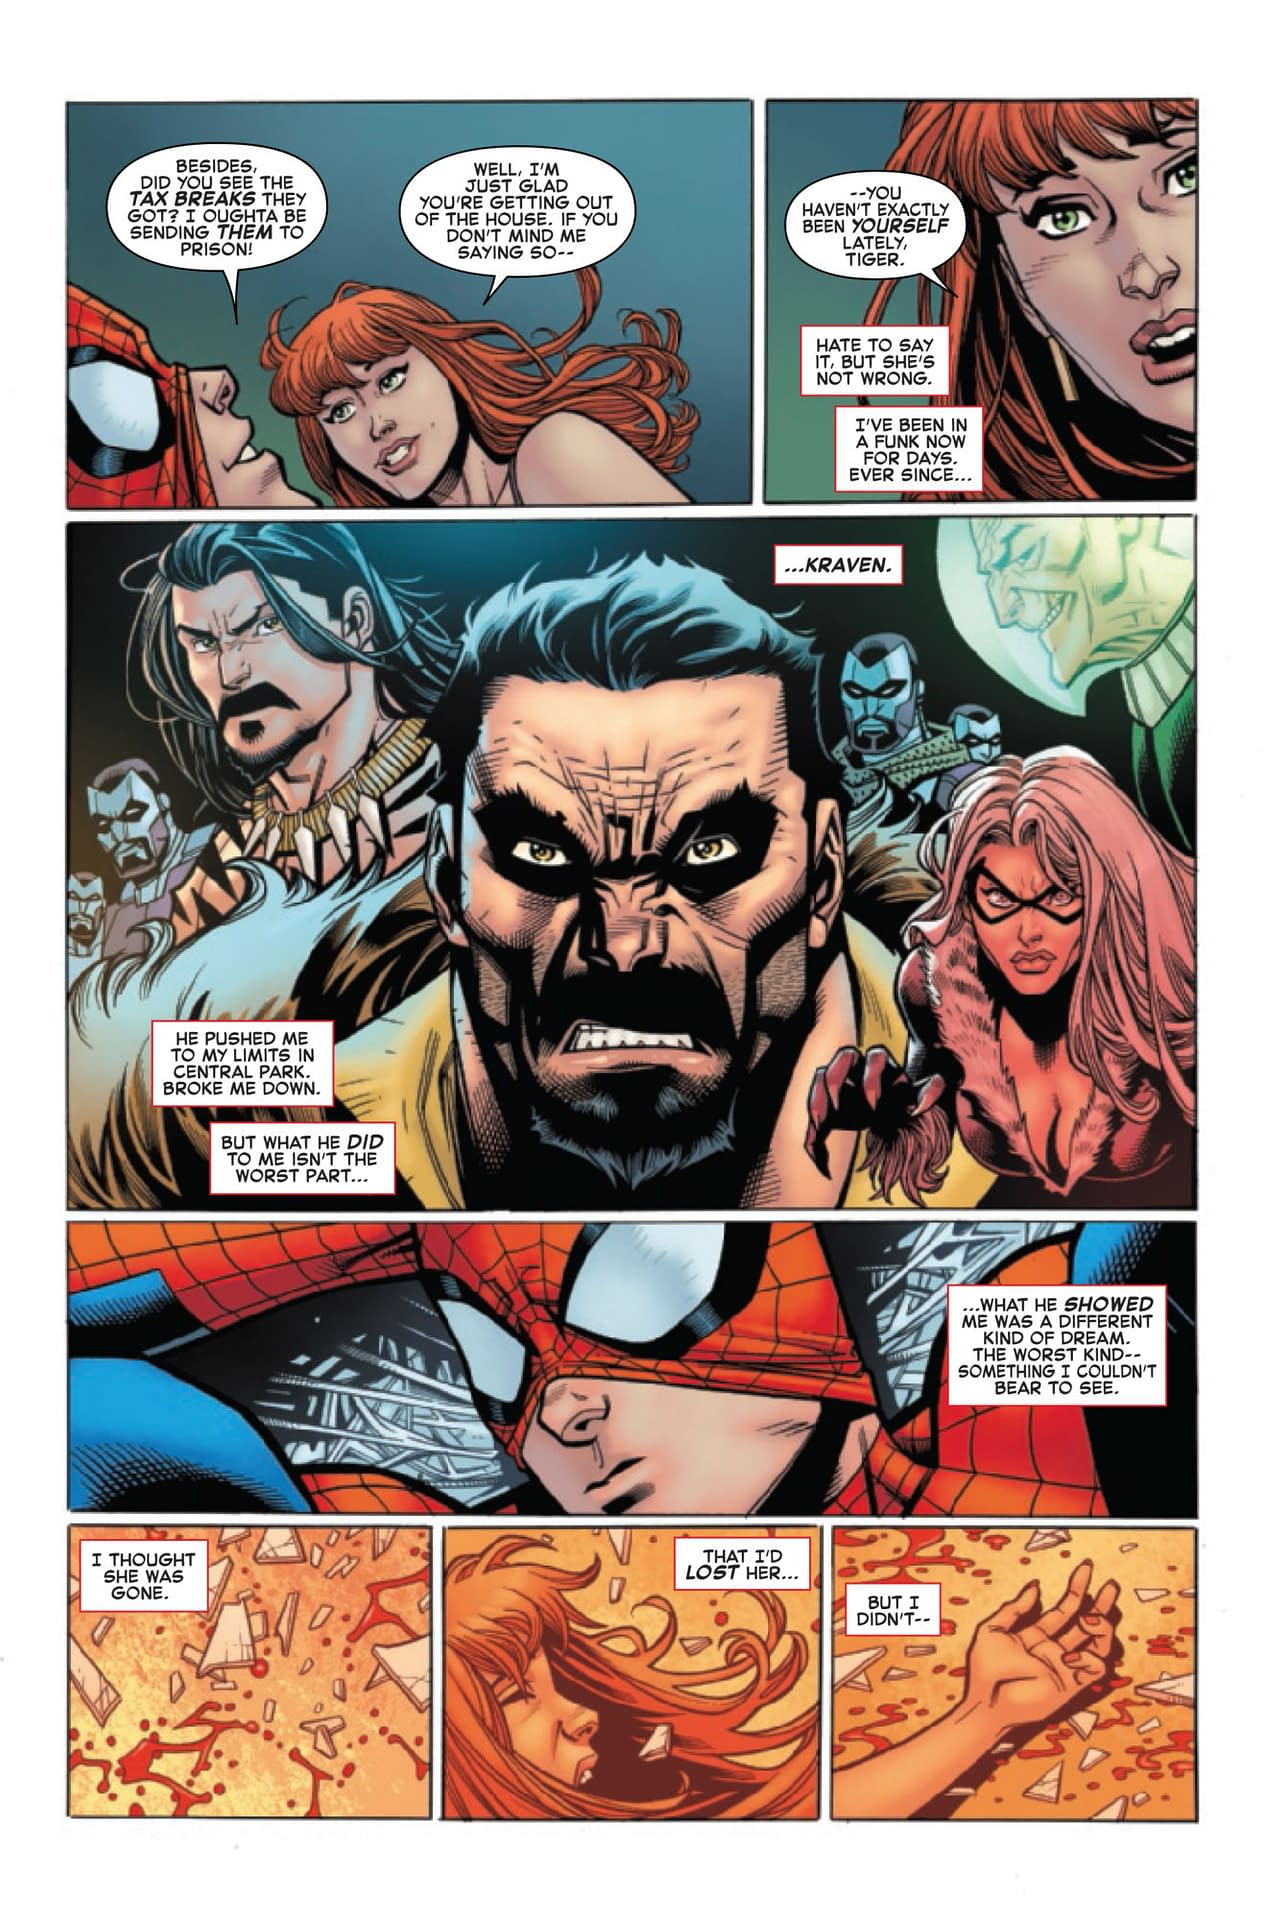 Spidey Gets "Romantic" with MJ in Amazing Spider-MAn #24 (Preview)